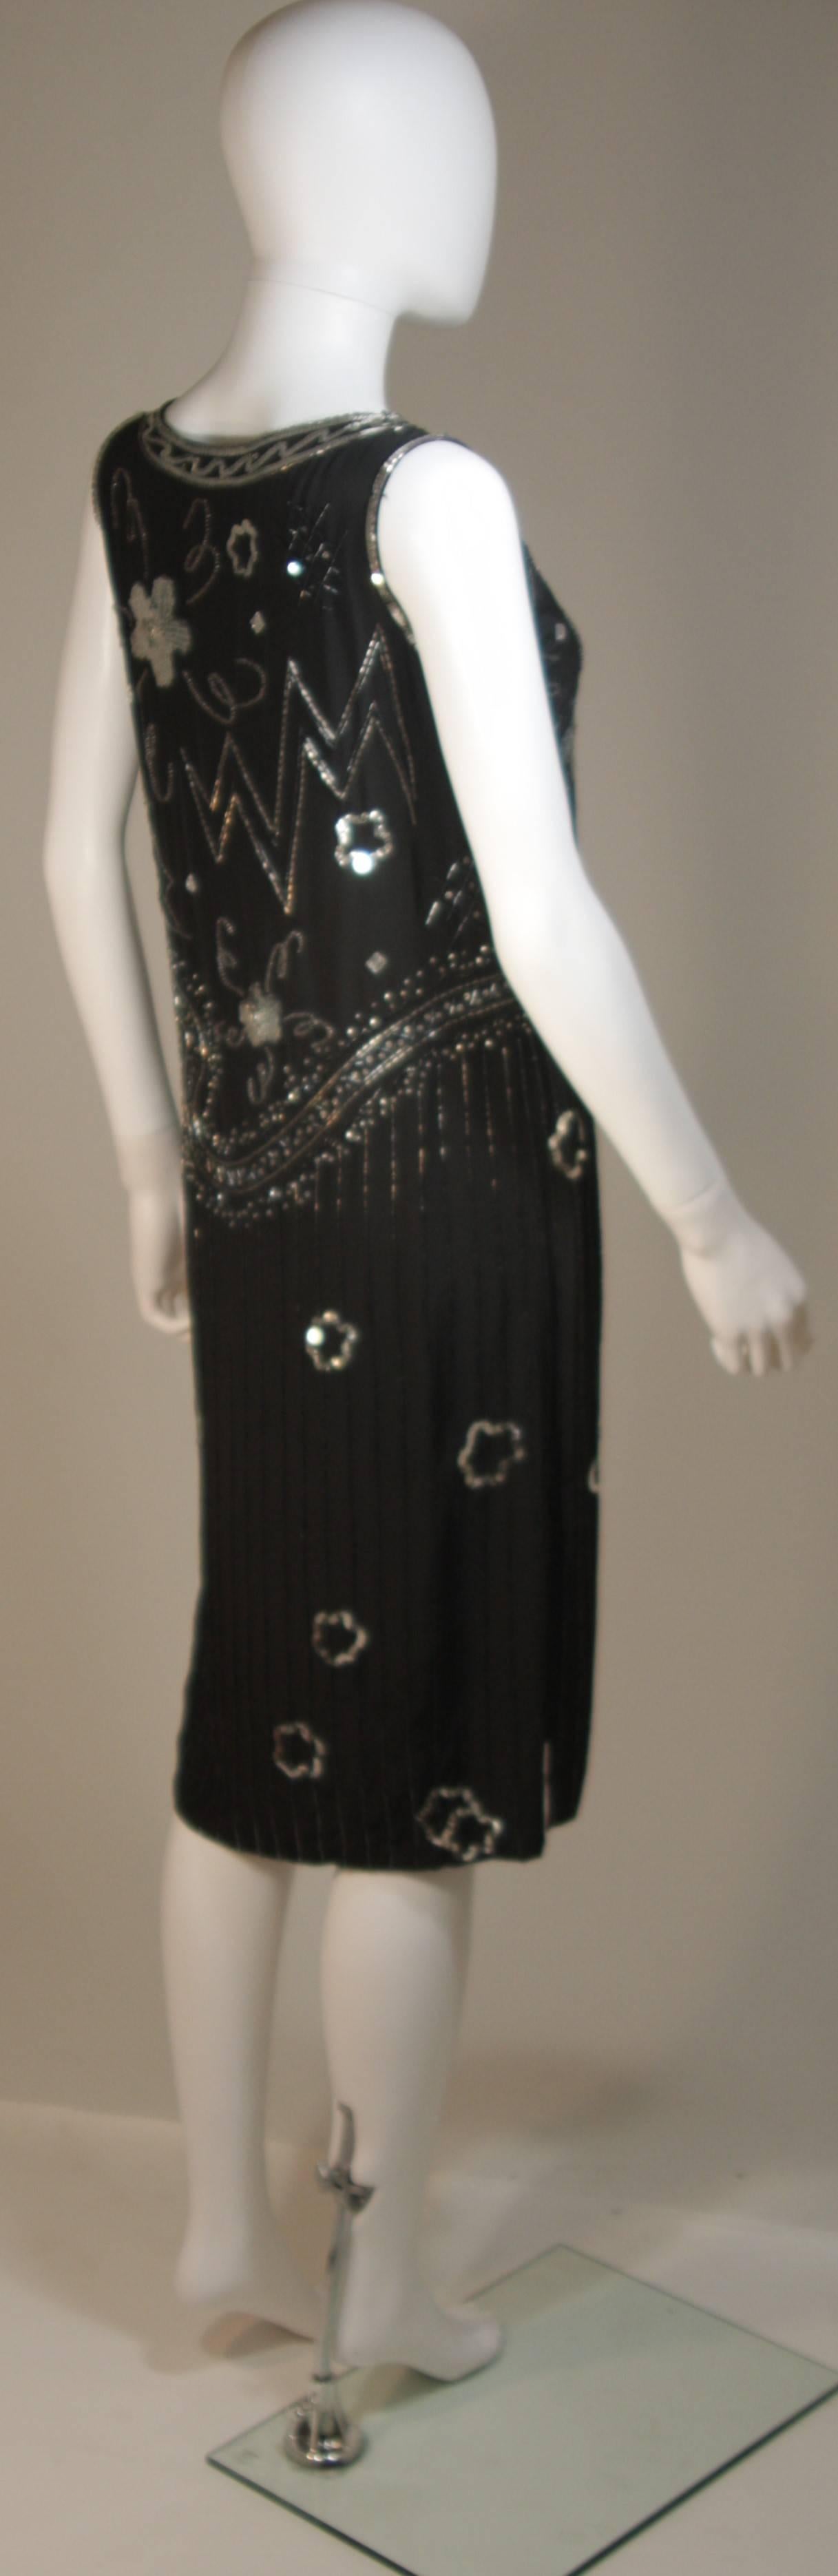 GIORGIO BEVERLY HILLS Sequin Embellished Deco Inspired Cocktail Dress Size 4-6 For Sale 2